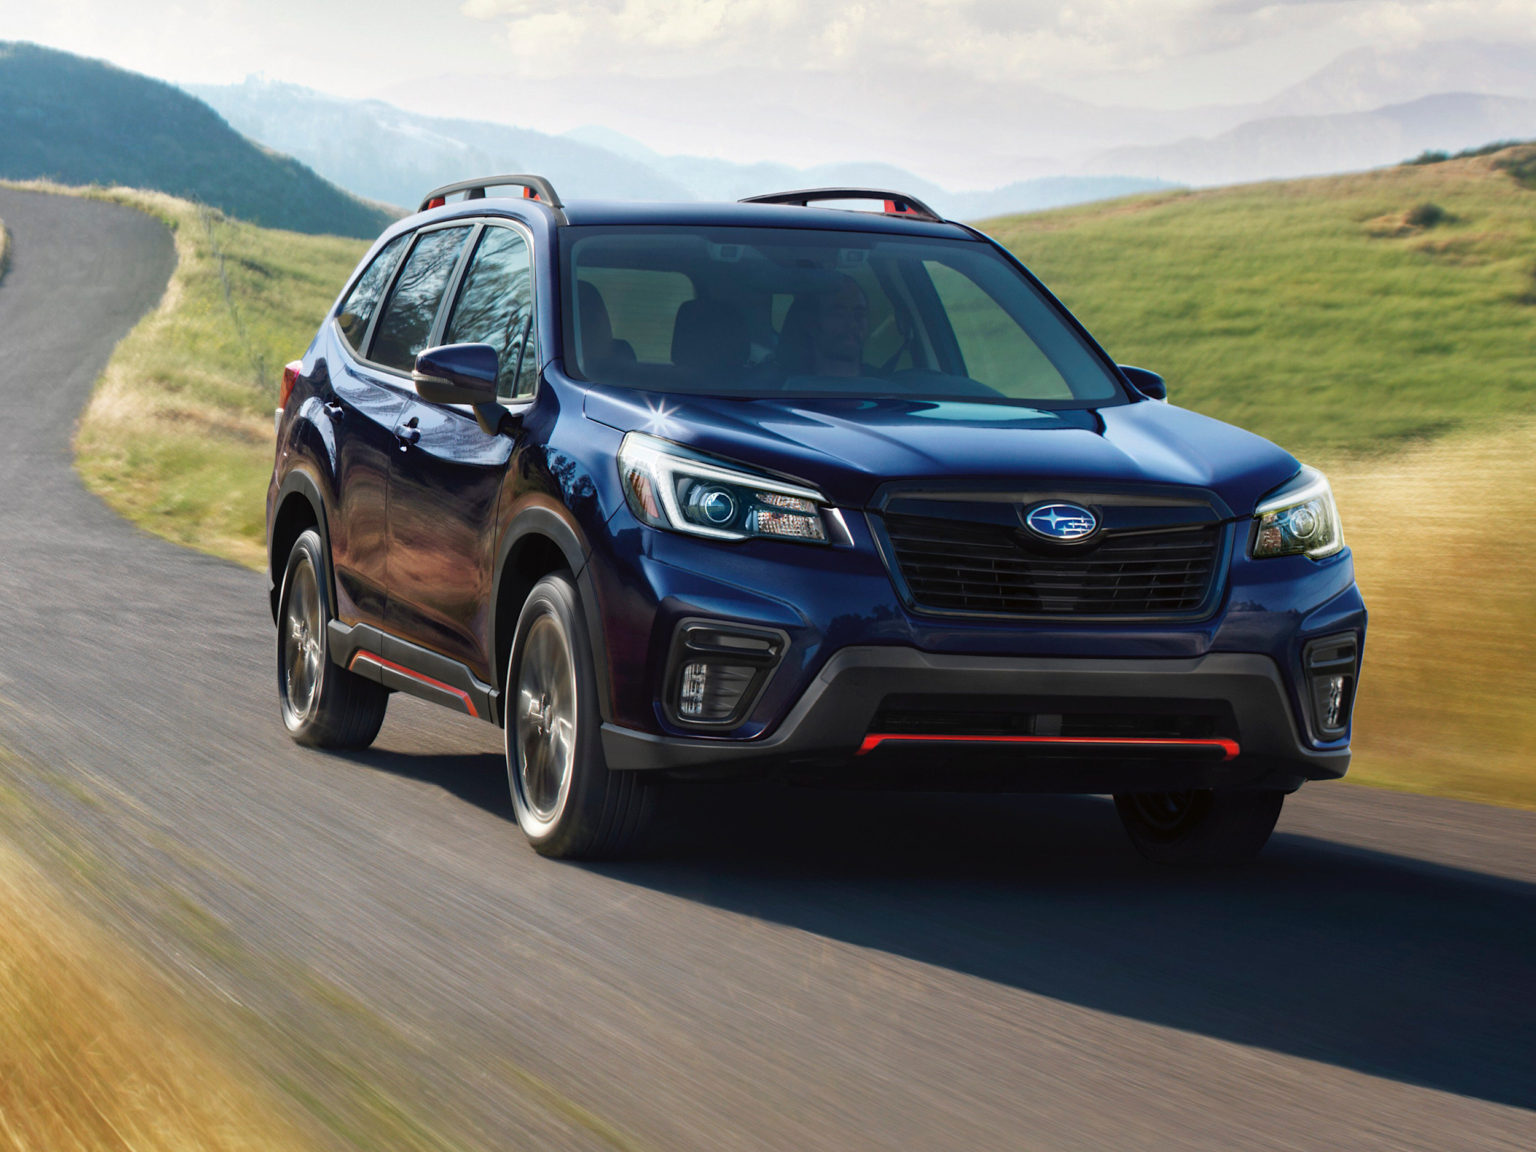 The 2021 Subaru Forester will continue to be offered in five trim levels, including this Sport model.